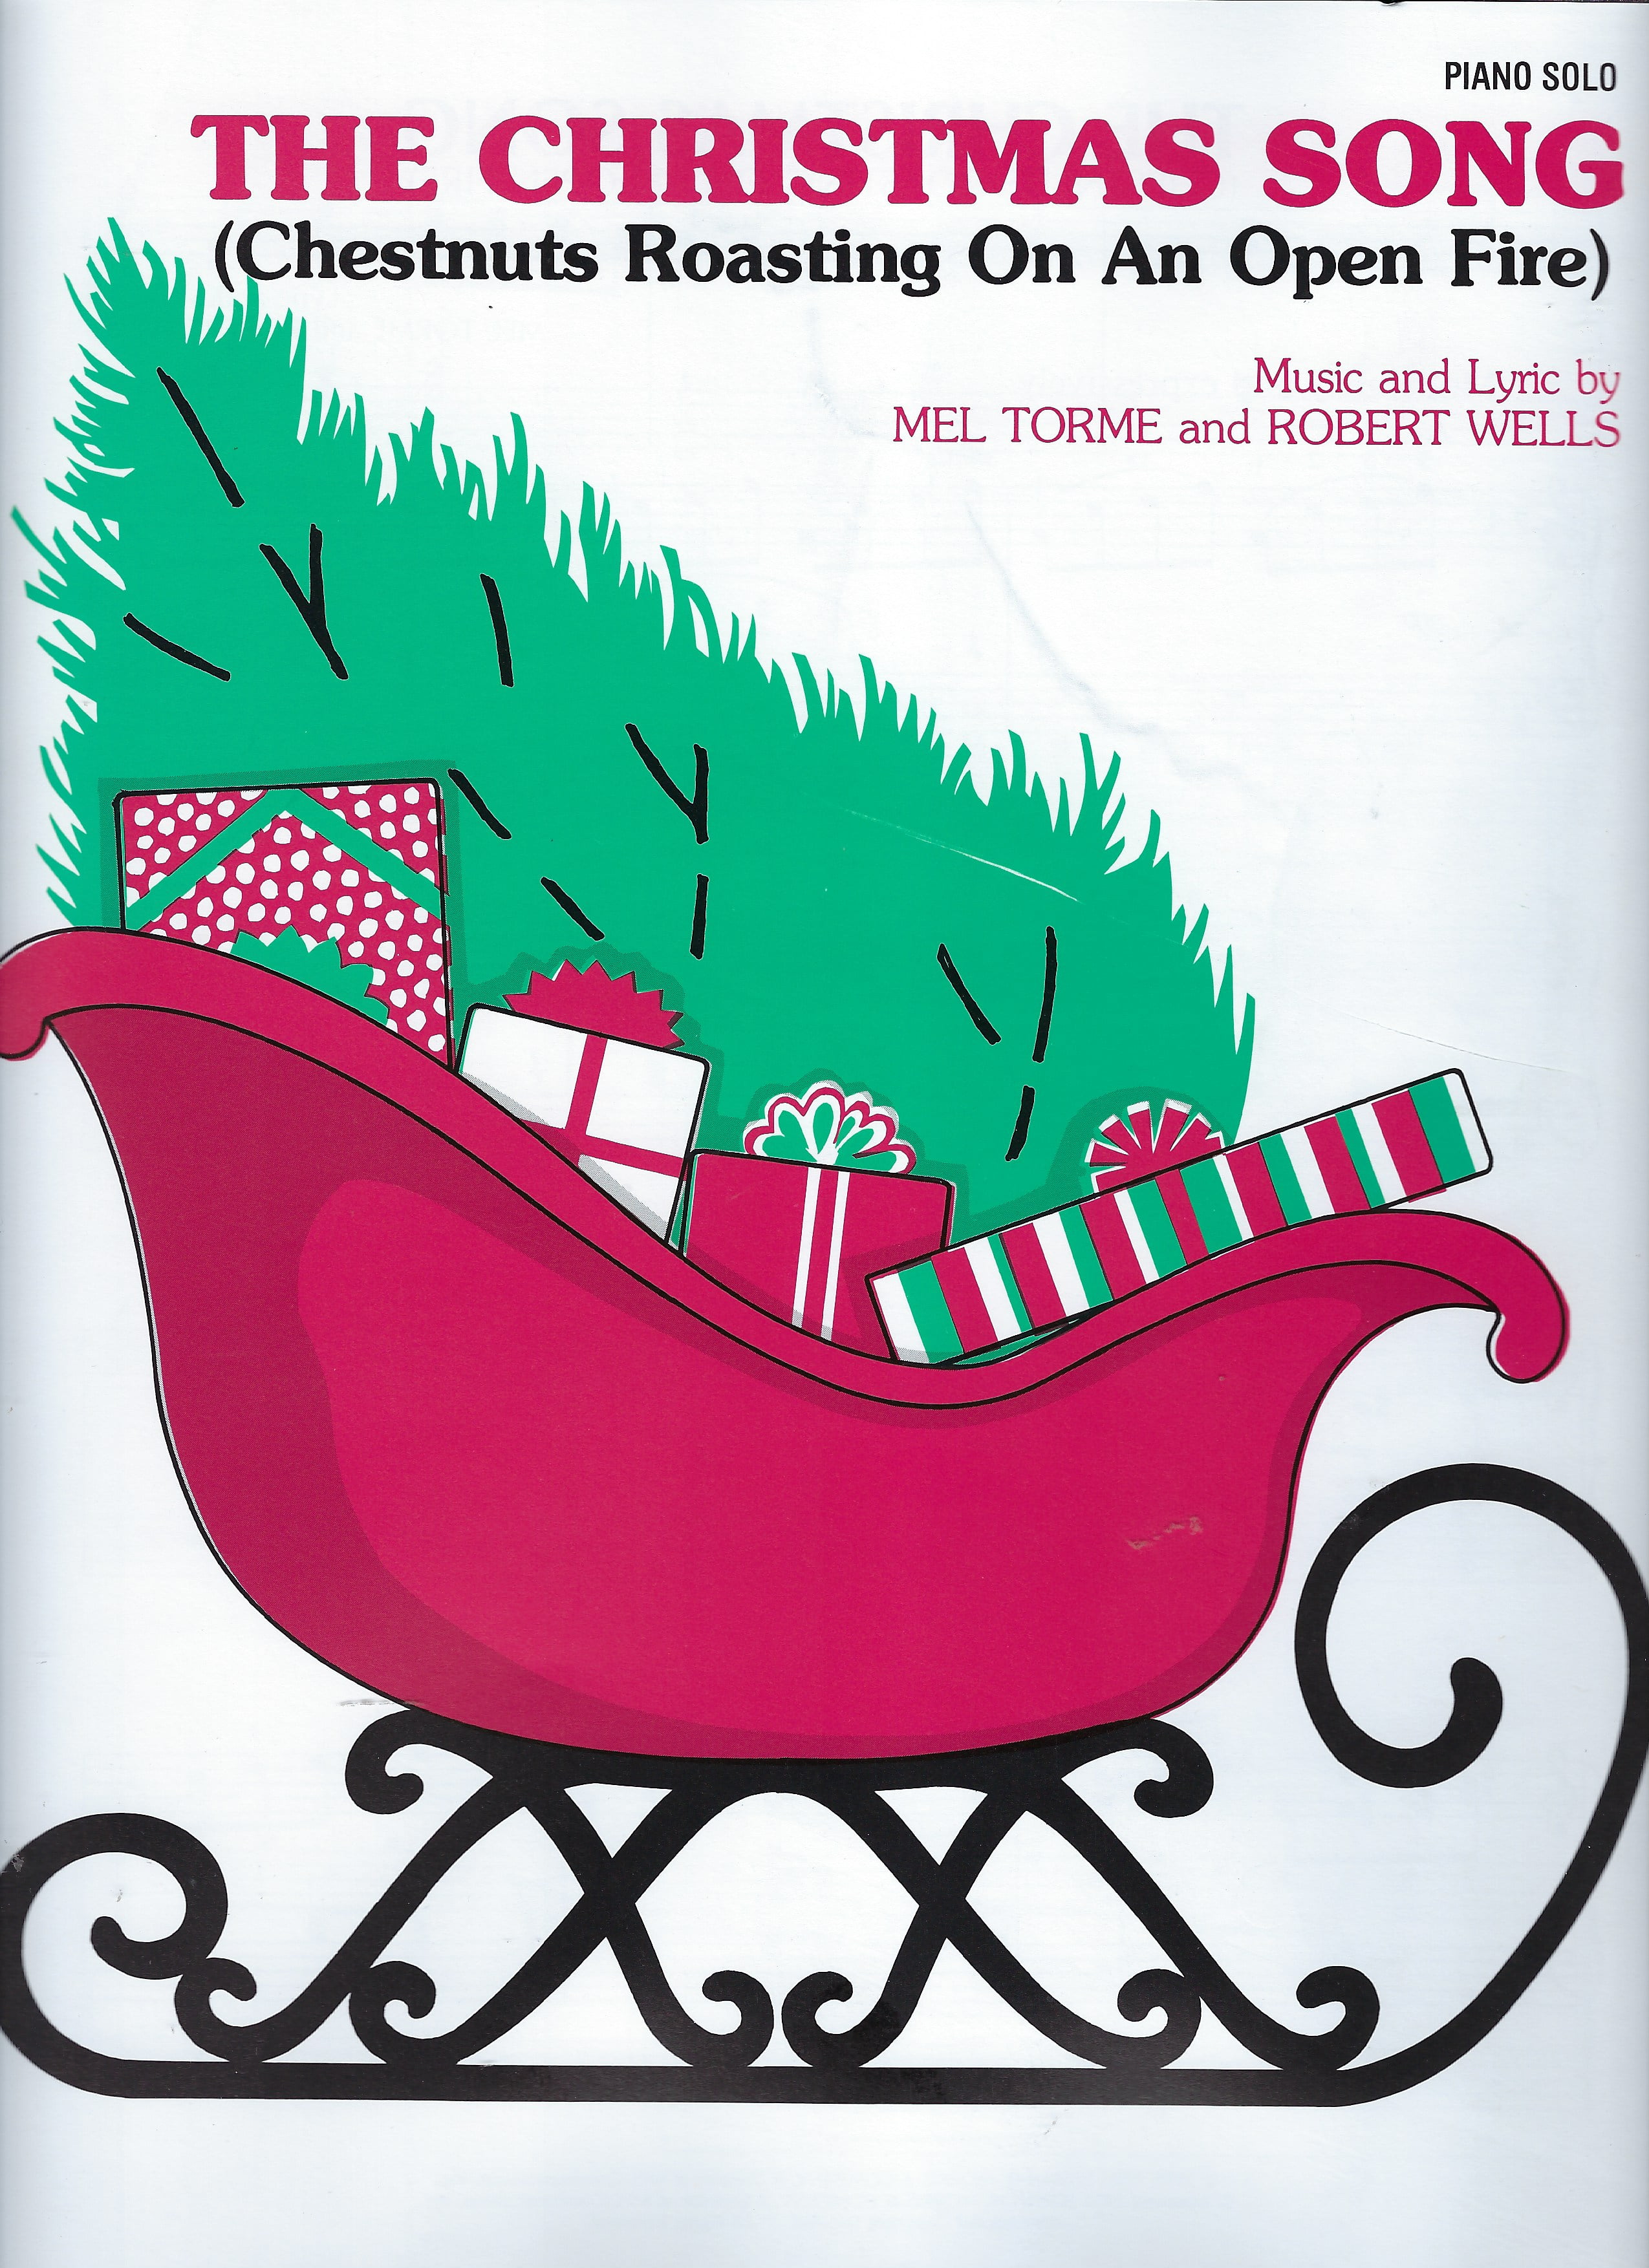 Christmas Song, The (Chestnuts Roasting on an Open Fire) Piano Solo Sheet Music - Walmart.com ...